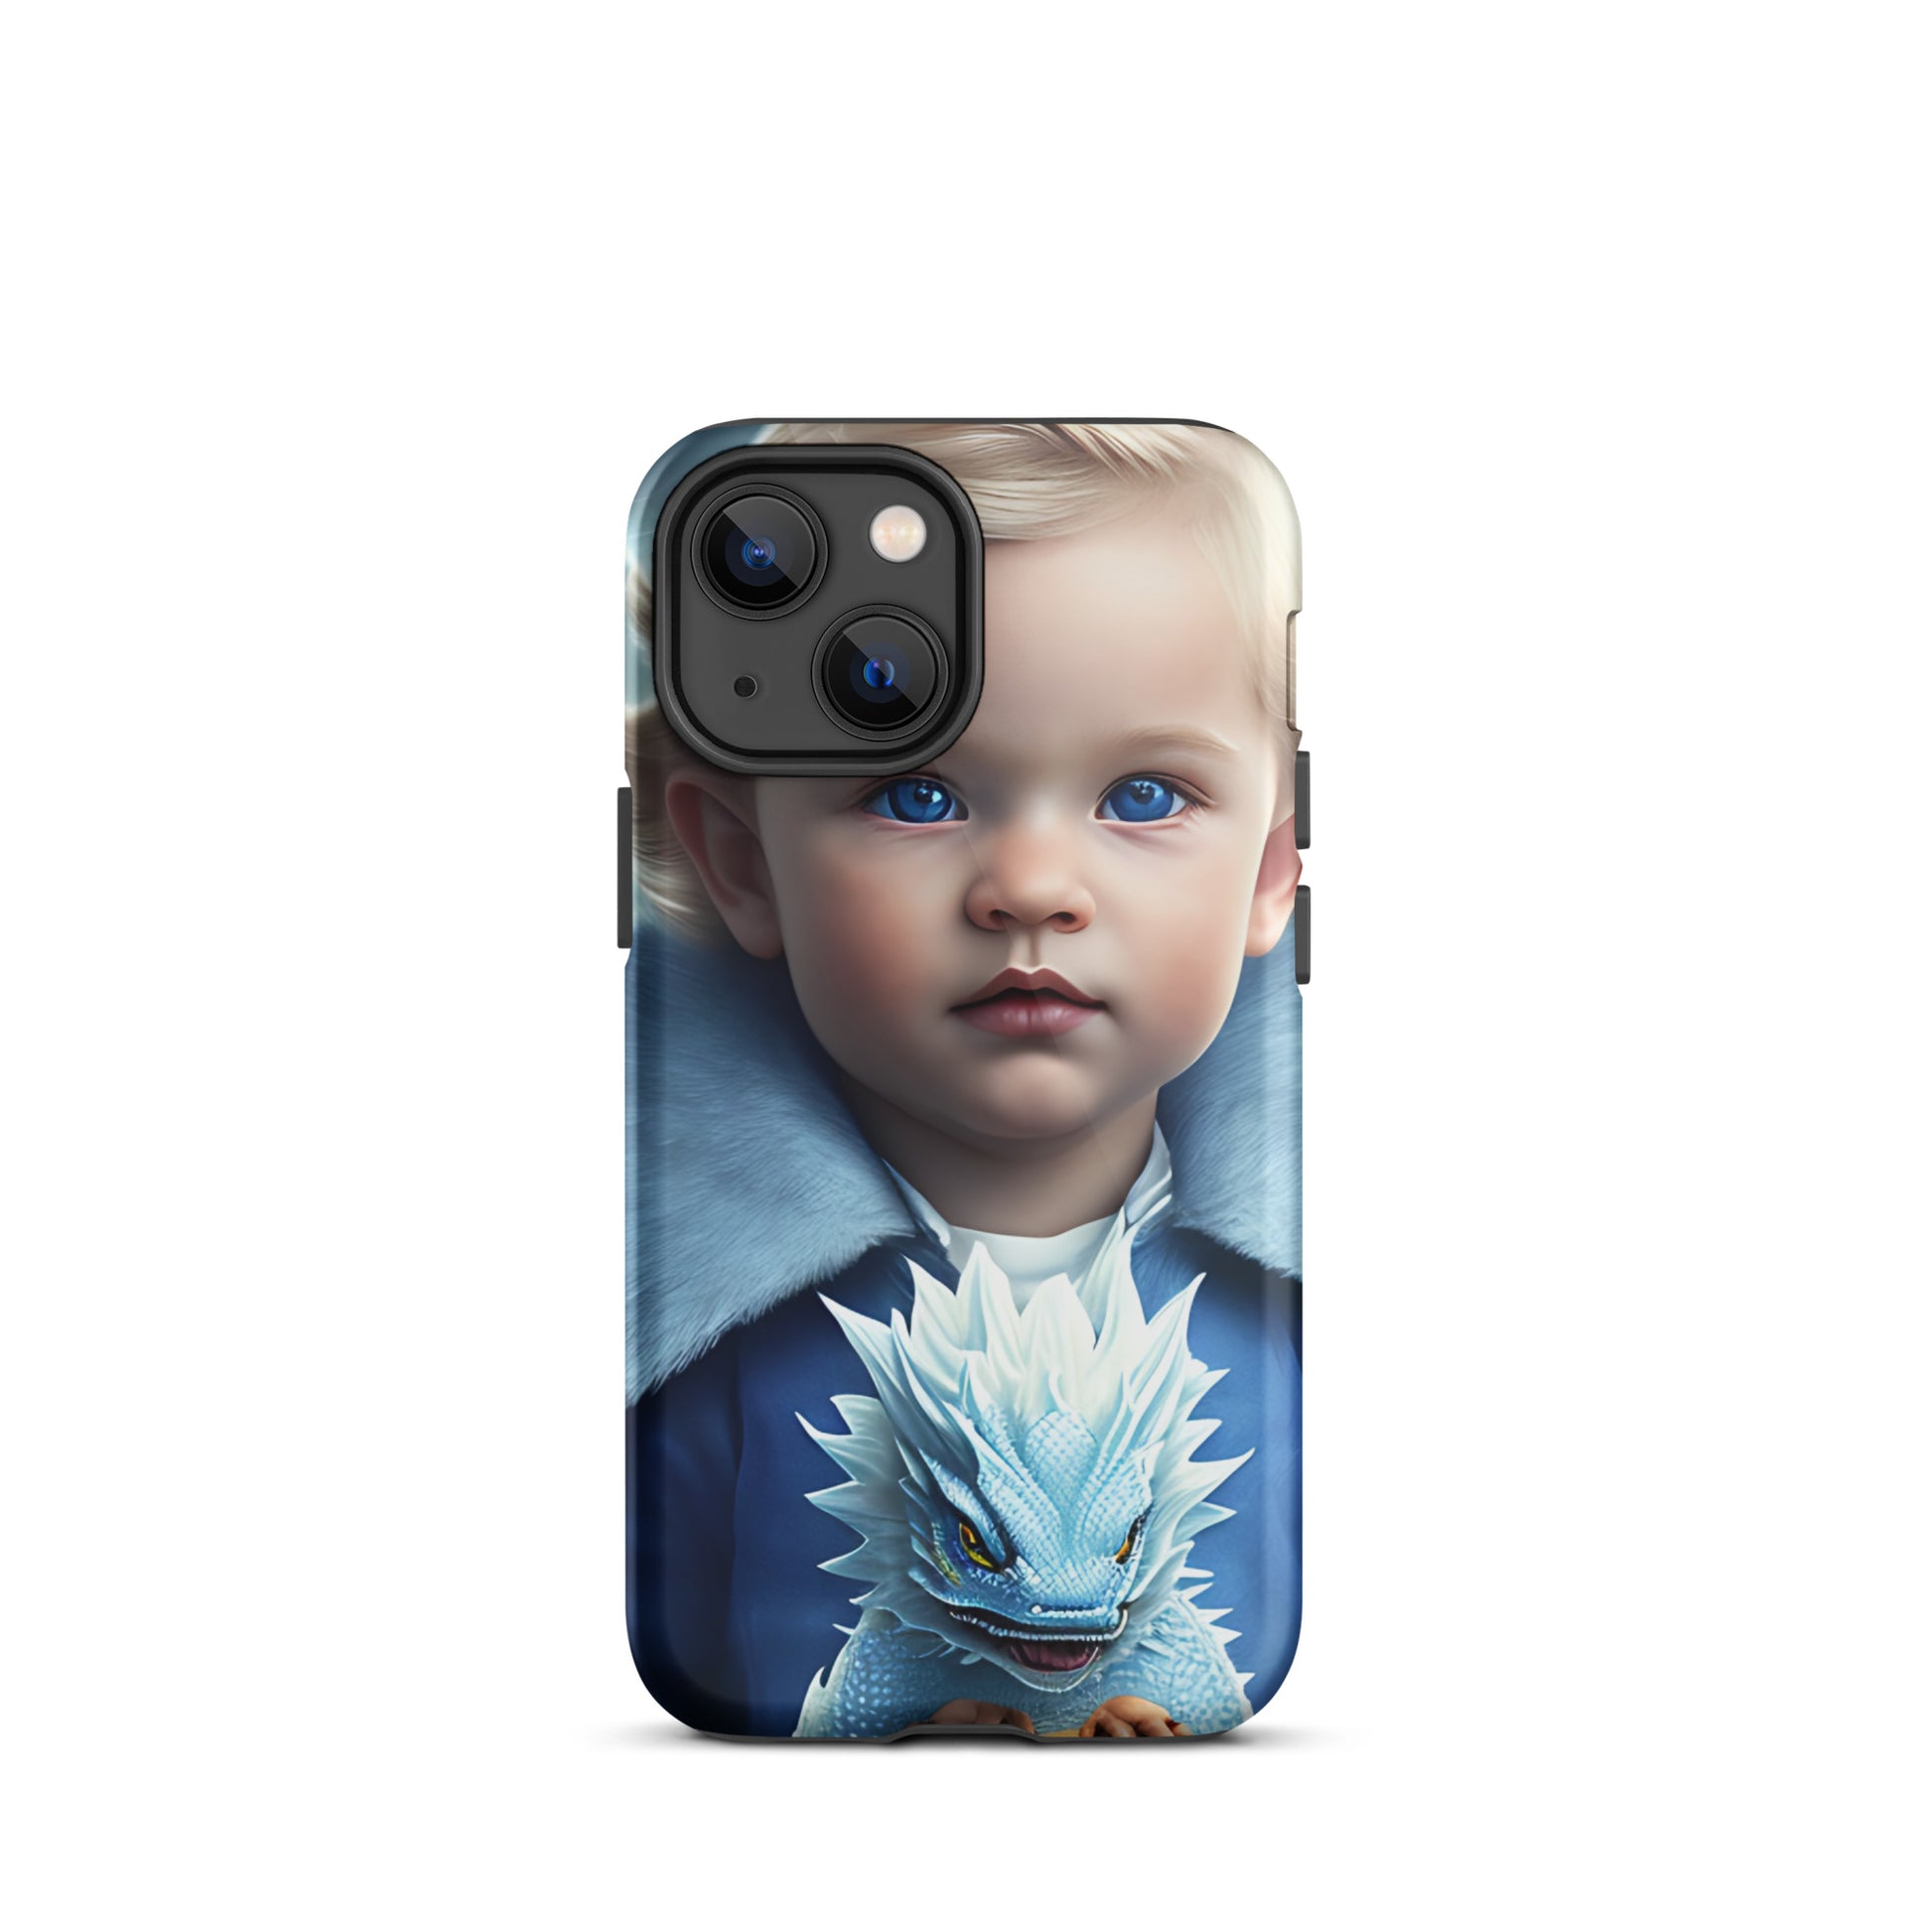 A picture of a an iphone case with a blond haired blue eyed boy, blue top holding a baby ice dragon in front - Dragon Prince #2 tough iphone case - glossy-iphone-13-mini-front